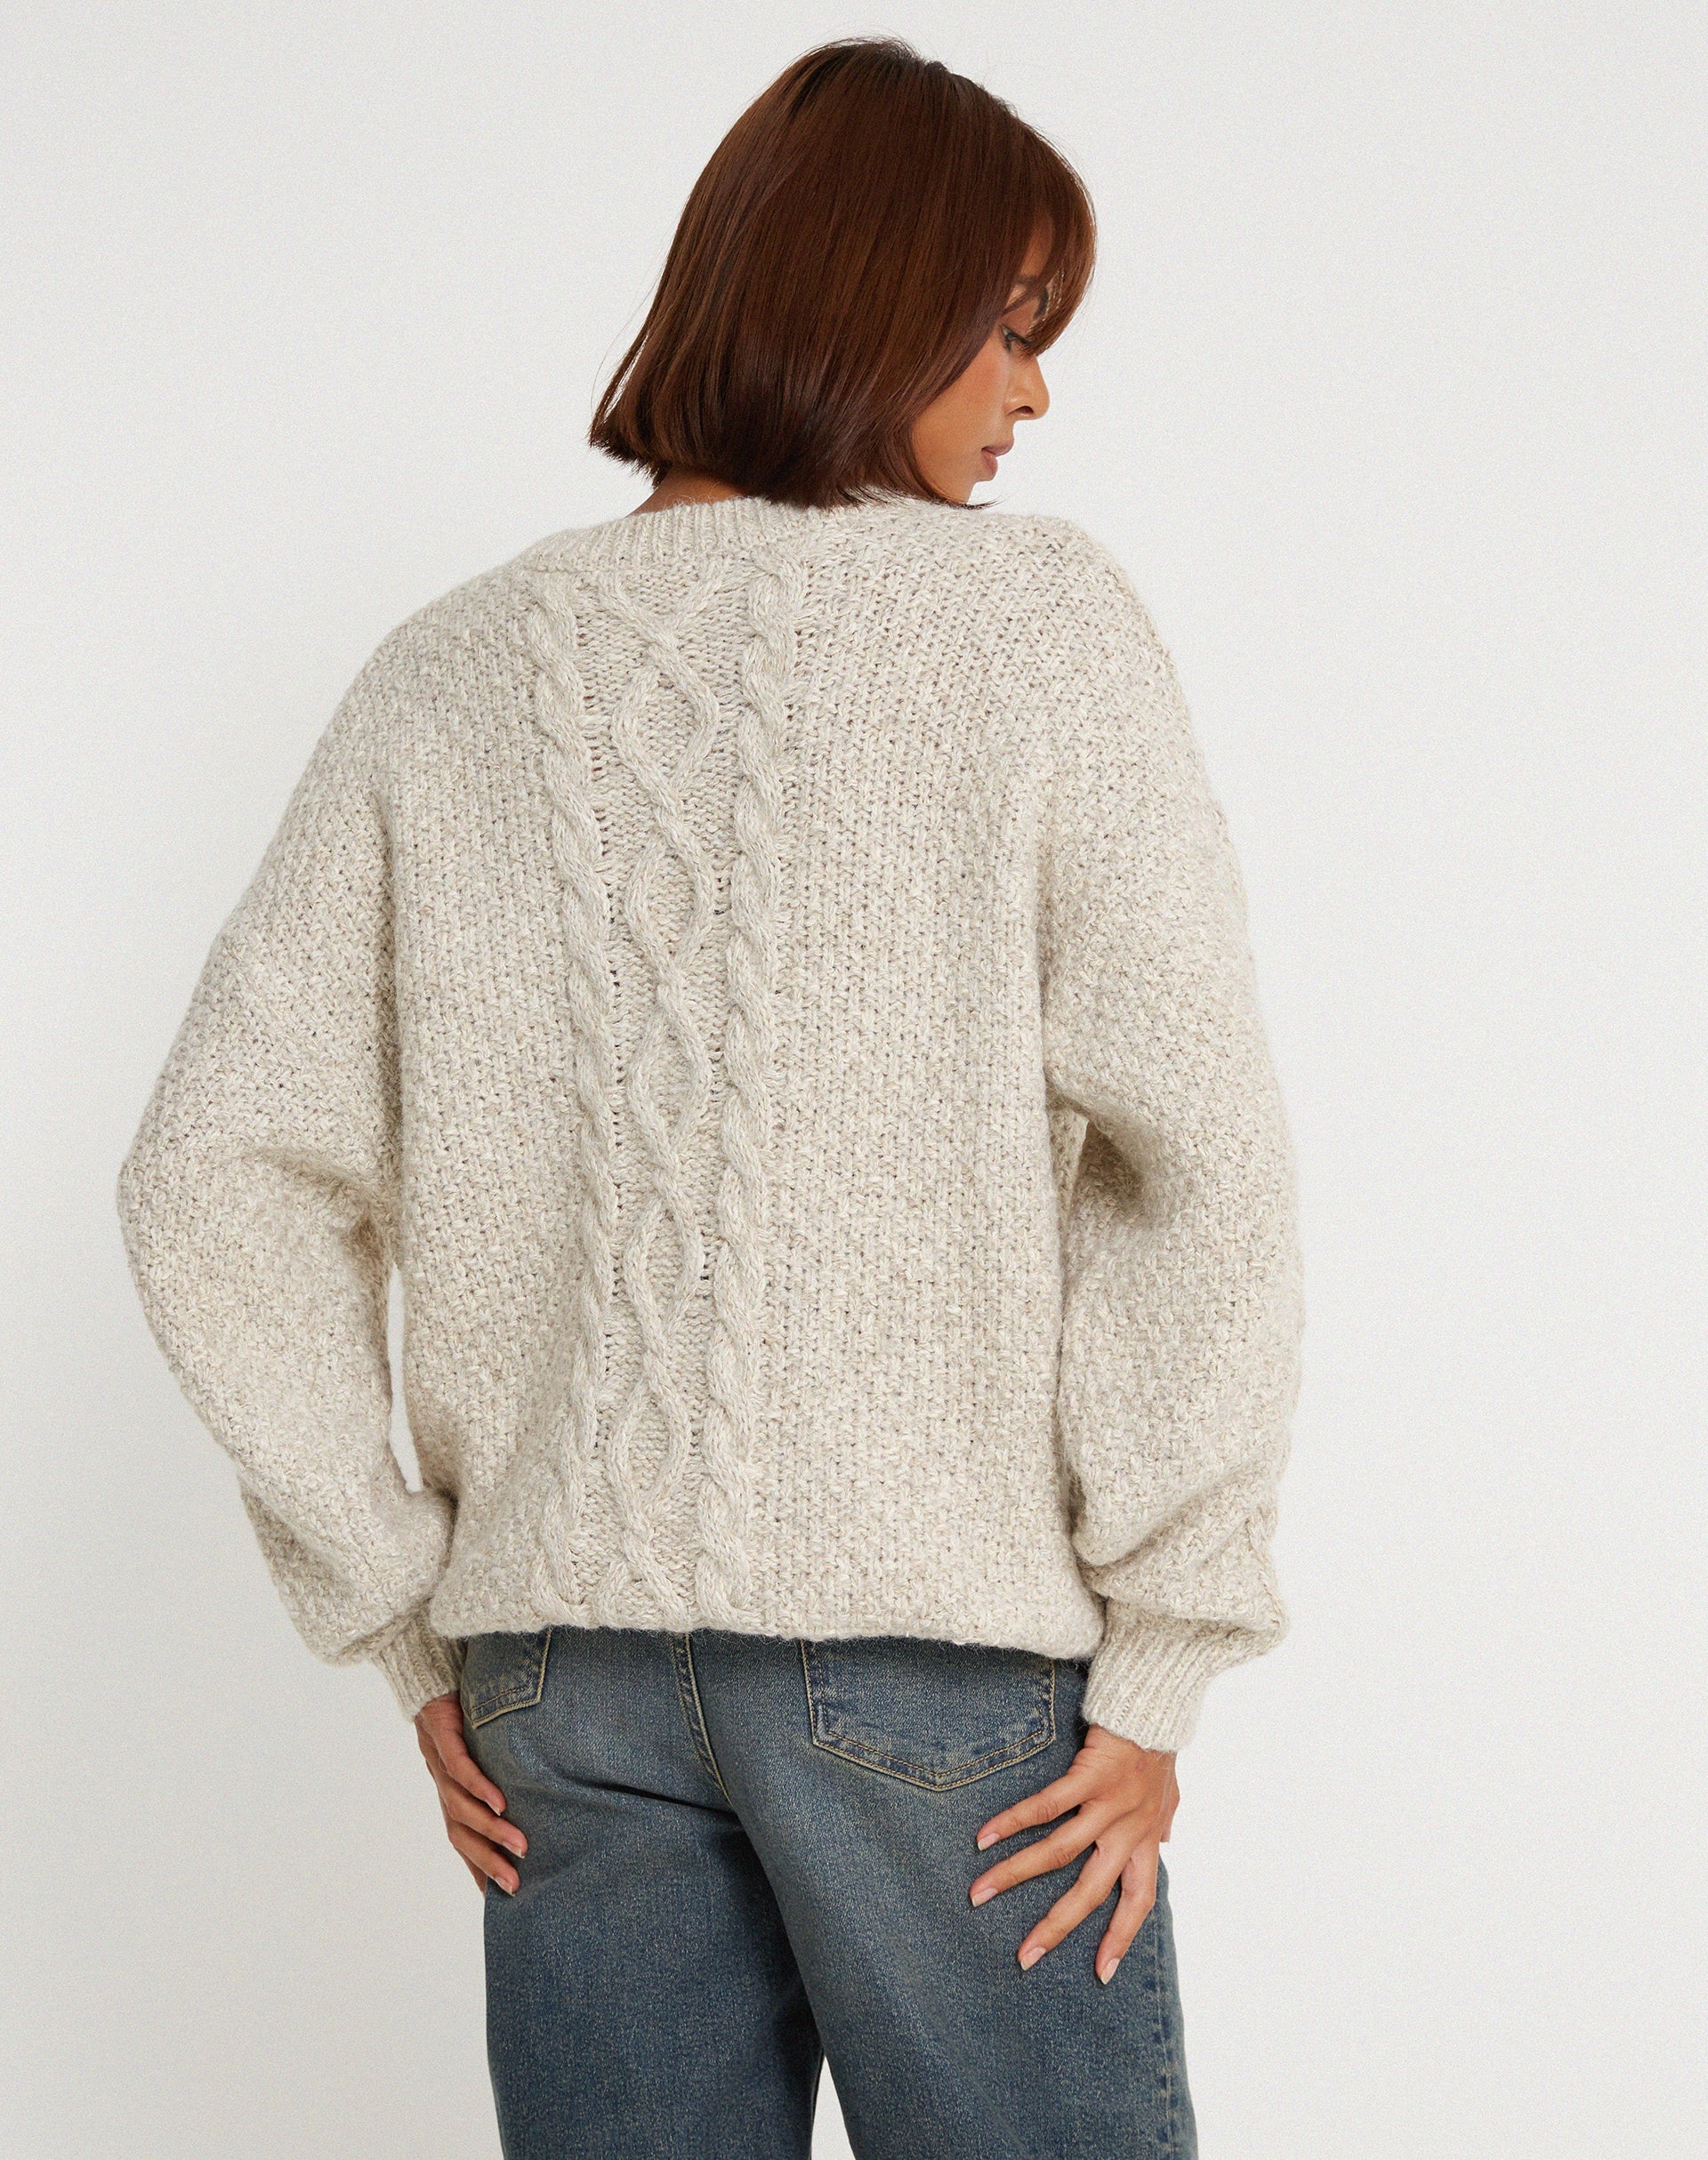 image of Chalih Jumper in Oatmeal